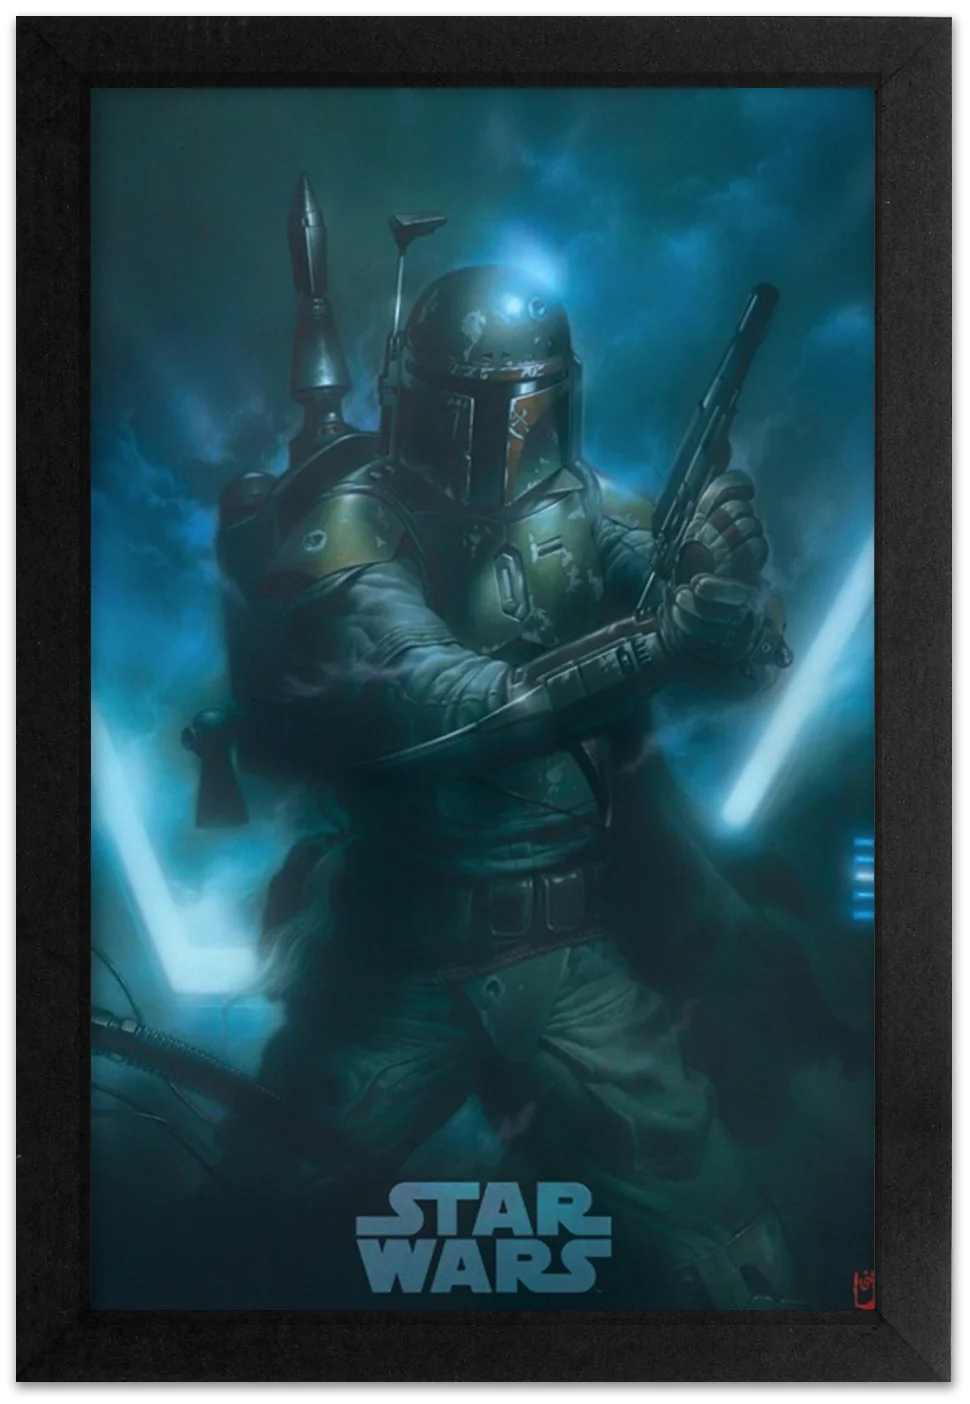 Star Wars - Boba Fett (11"x17" Gel-Coat) (Order in multiples of 6, mix and match styles)